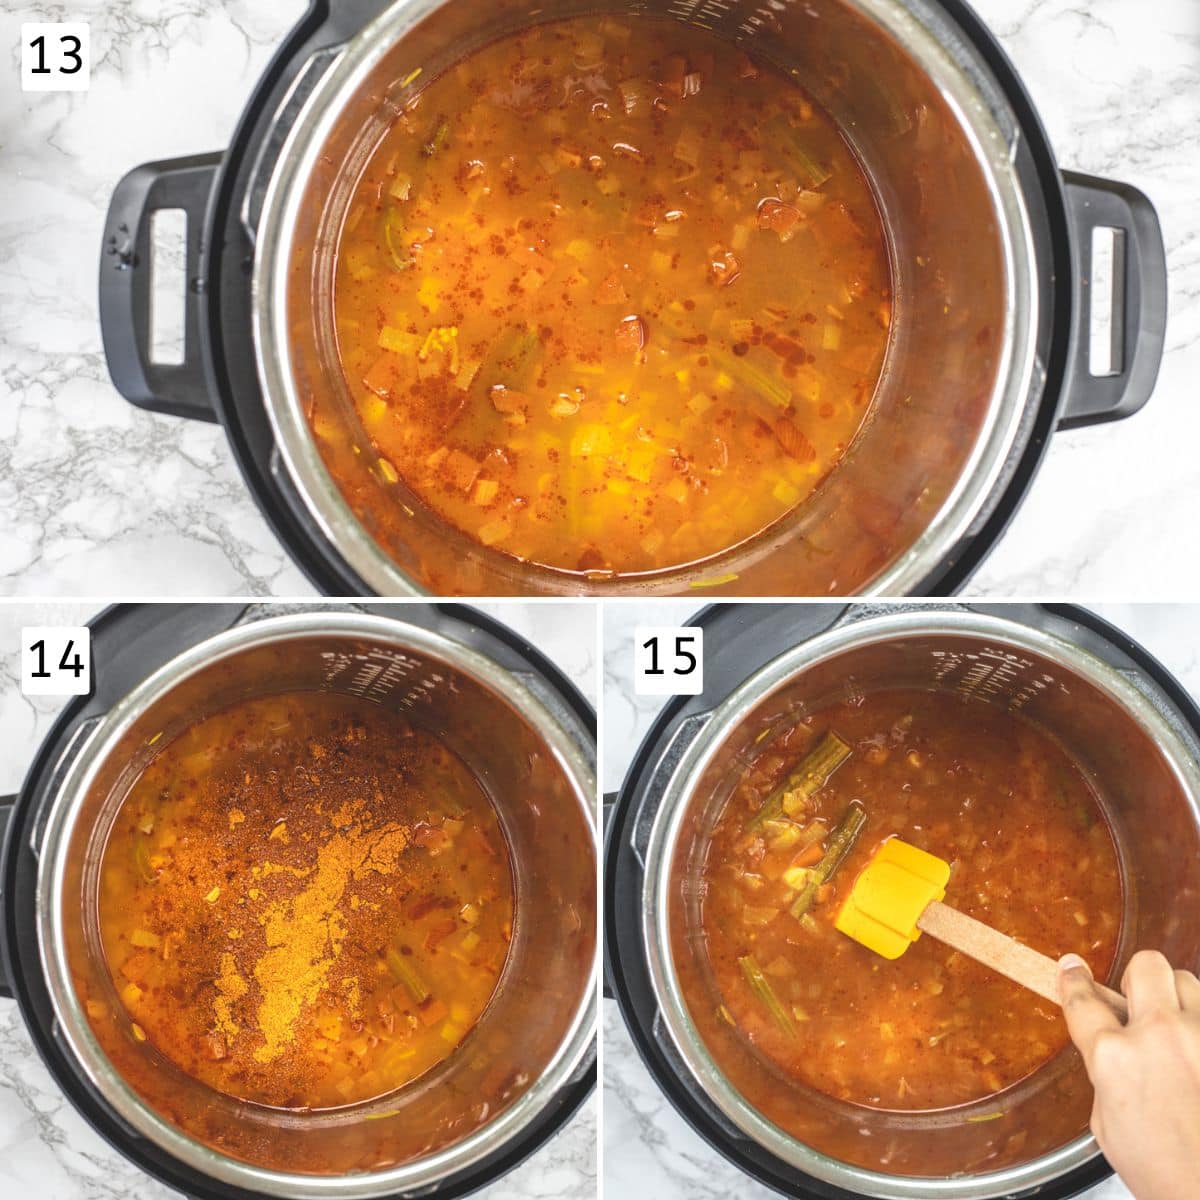 Collage of 3 images showing cooked veggies and adding, mixing sambar powder.